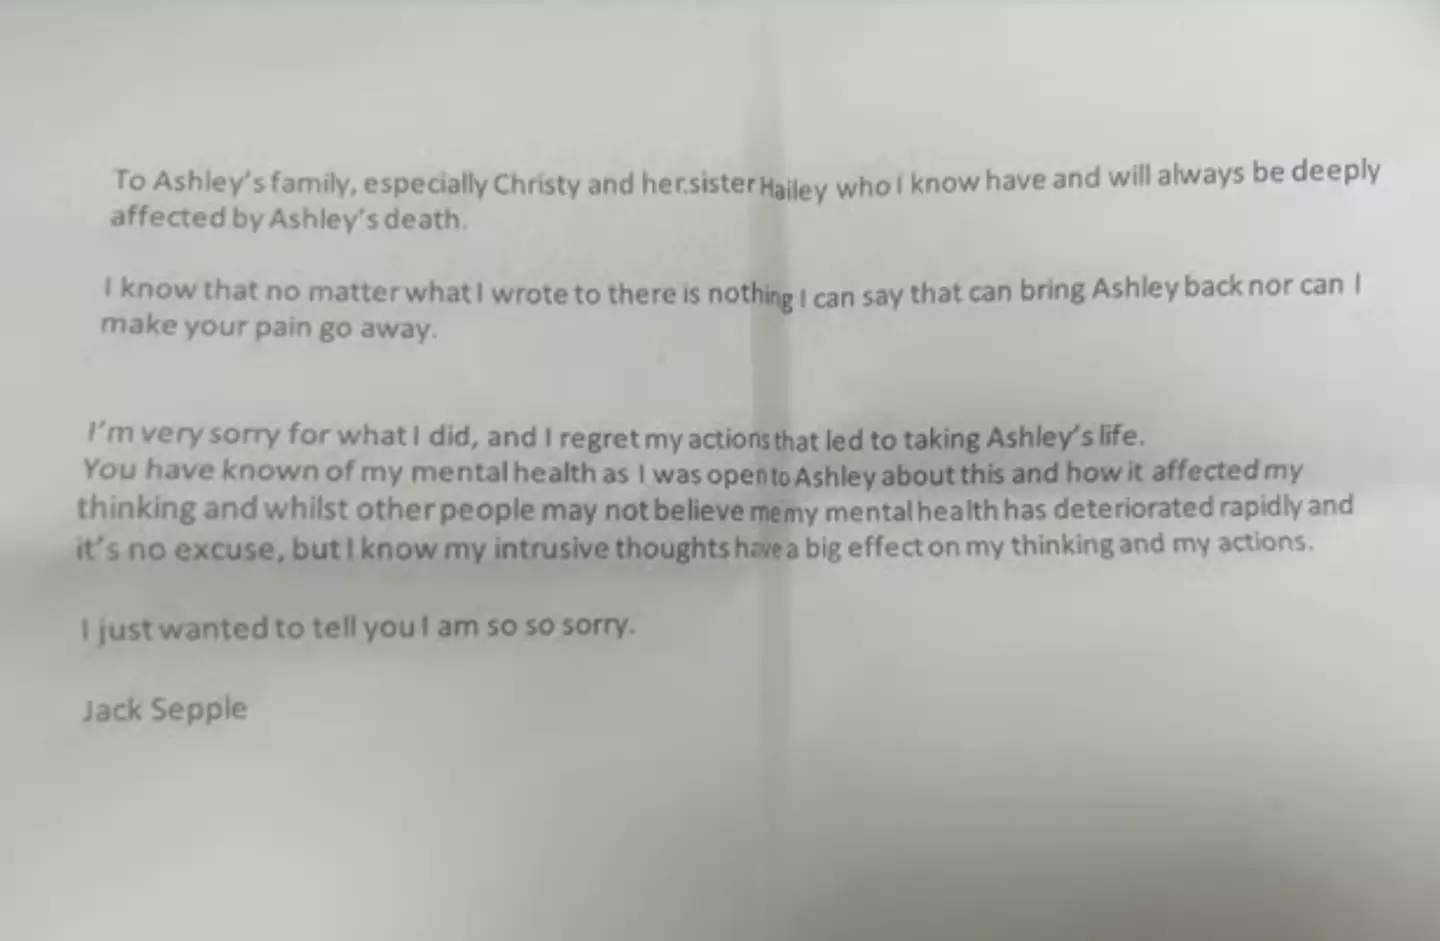 Sepple apologised to the family for killing their daughter, Ashley.